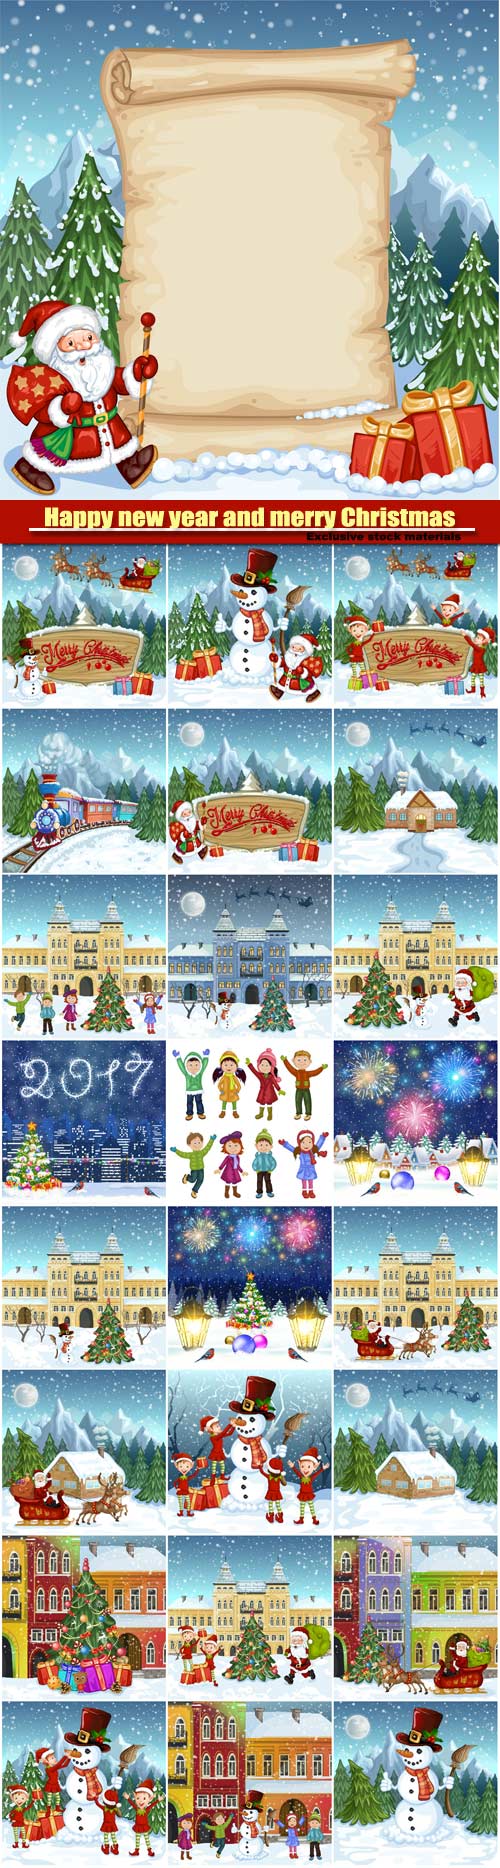 Happy new year and merry Christmas vector, winter town, children with snowm ...